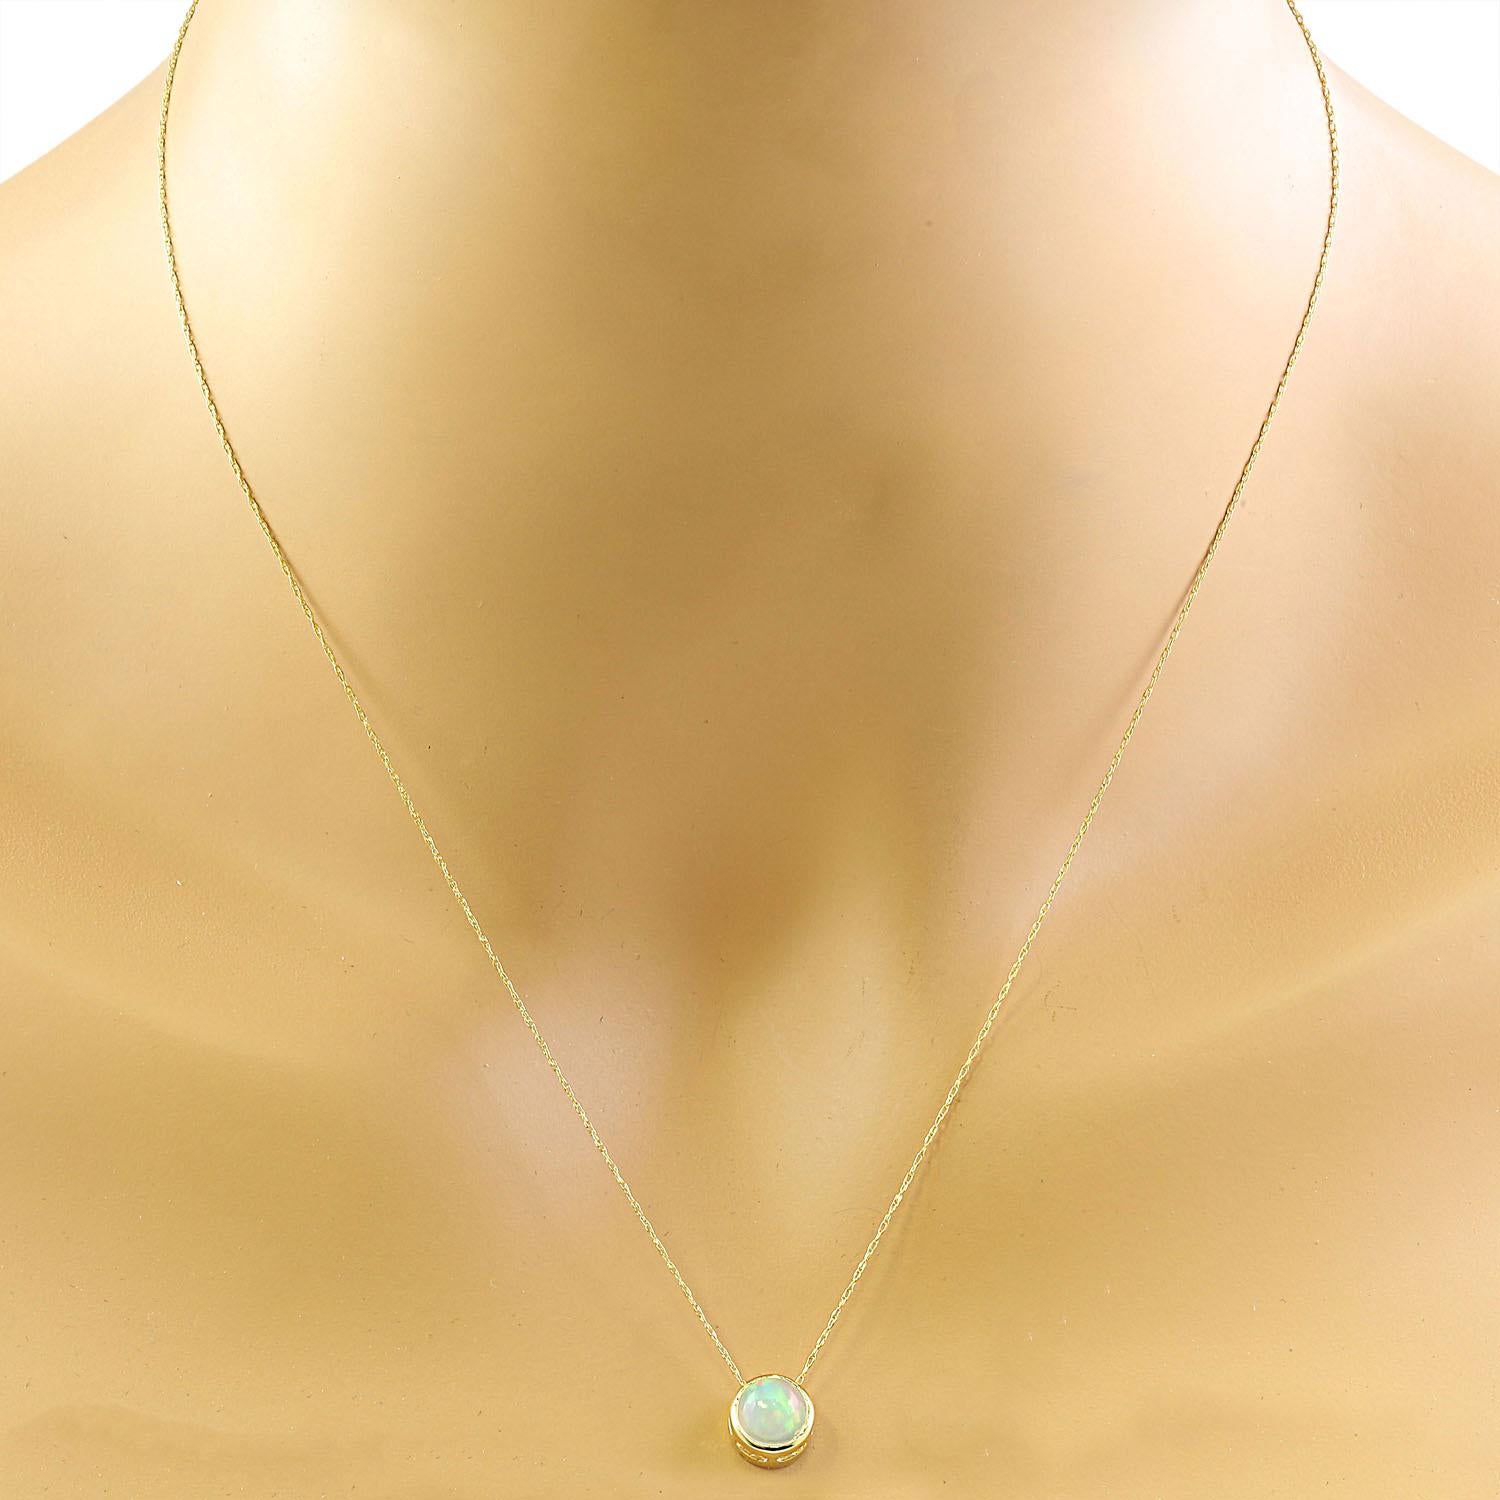 1.50 Carat Opal 14K Yellow Gold Necklace
Stamped: 14K
Total Necklace Weight: 1.4 Grams
Length 16 Inches
Opal Weight: 1.50 Carat (6.50x6.50 Millimeters) 
Face Measures: 8.20x8.20 Millimeter 
SKU: [600190]